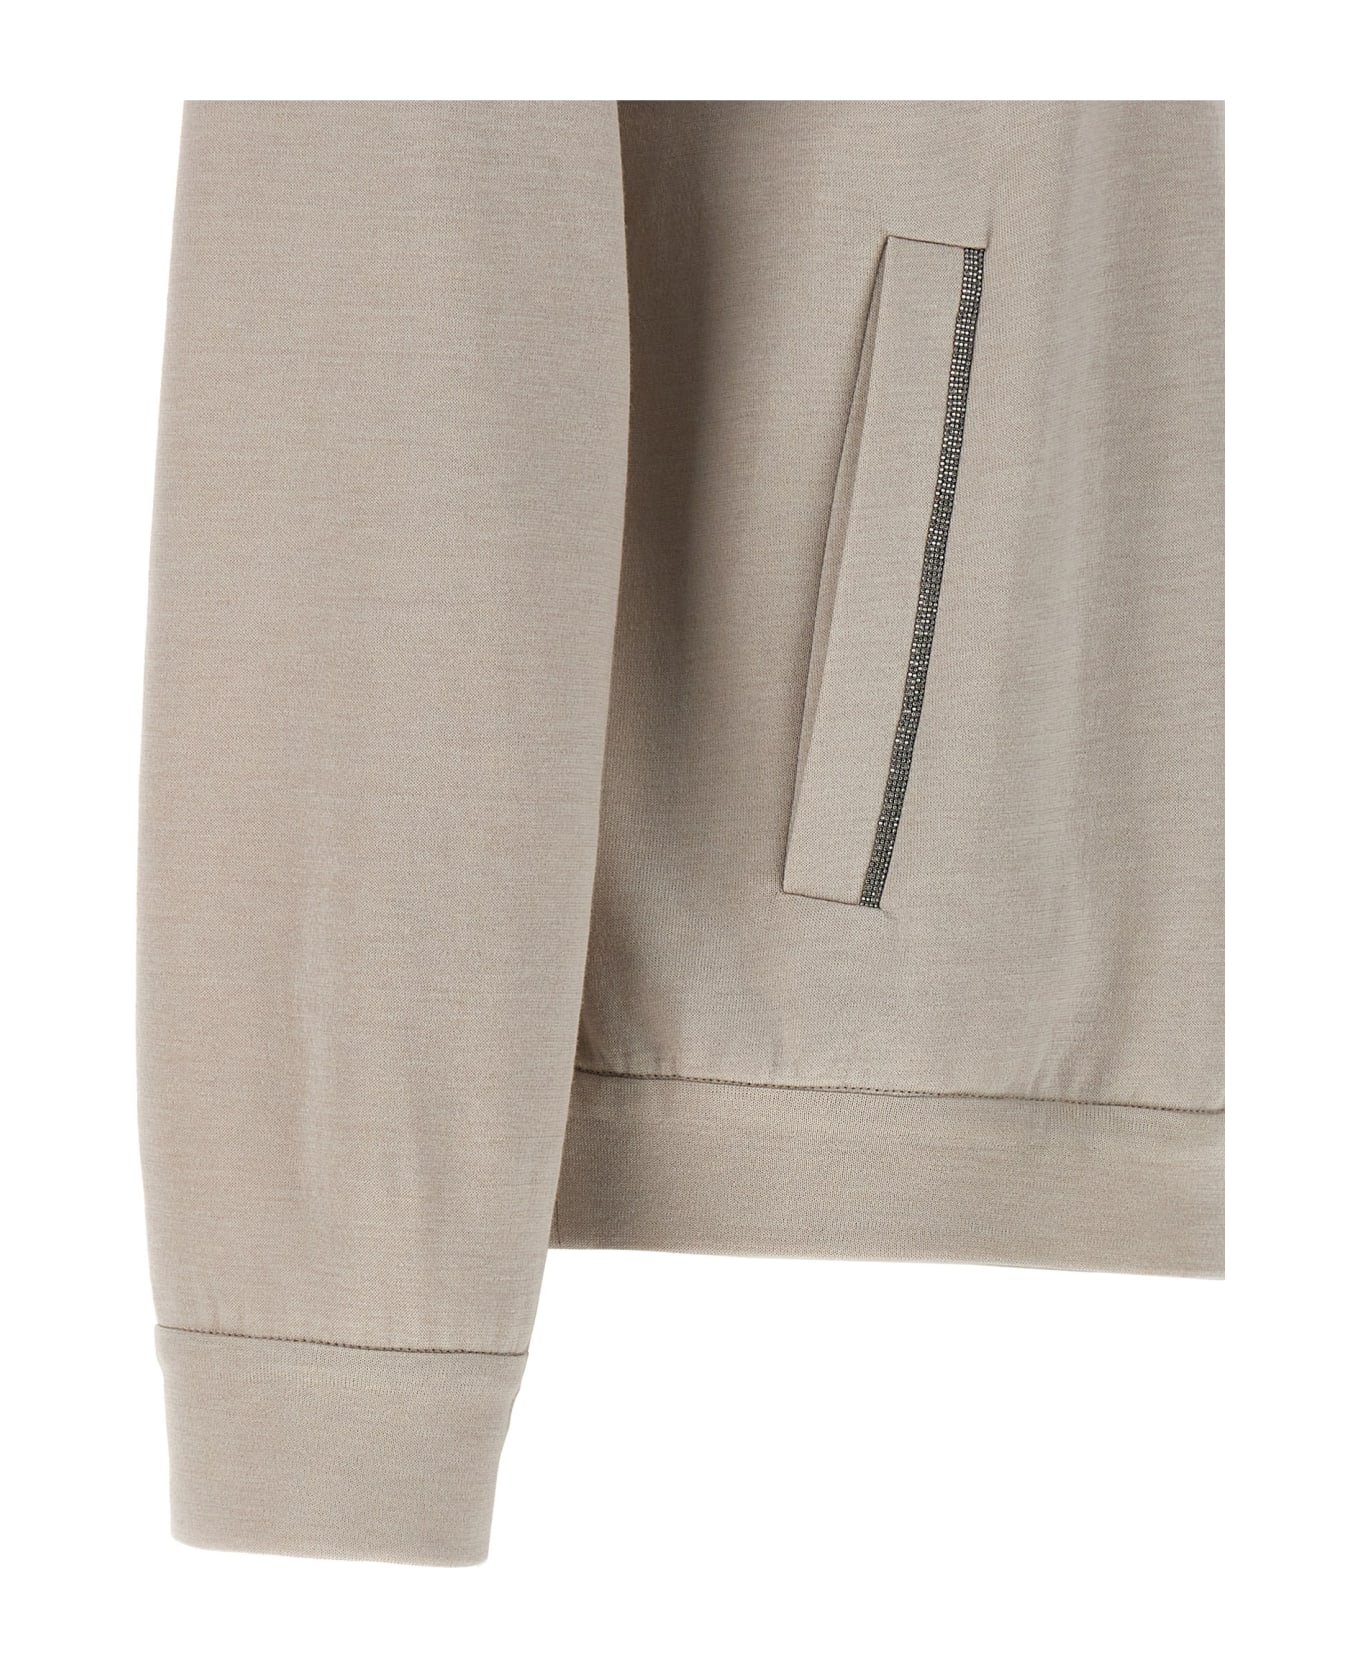 Brunello Cucinelli Hoodie With Zip Closure In Cotton And Silk - Gray